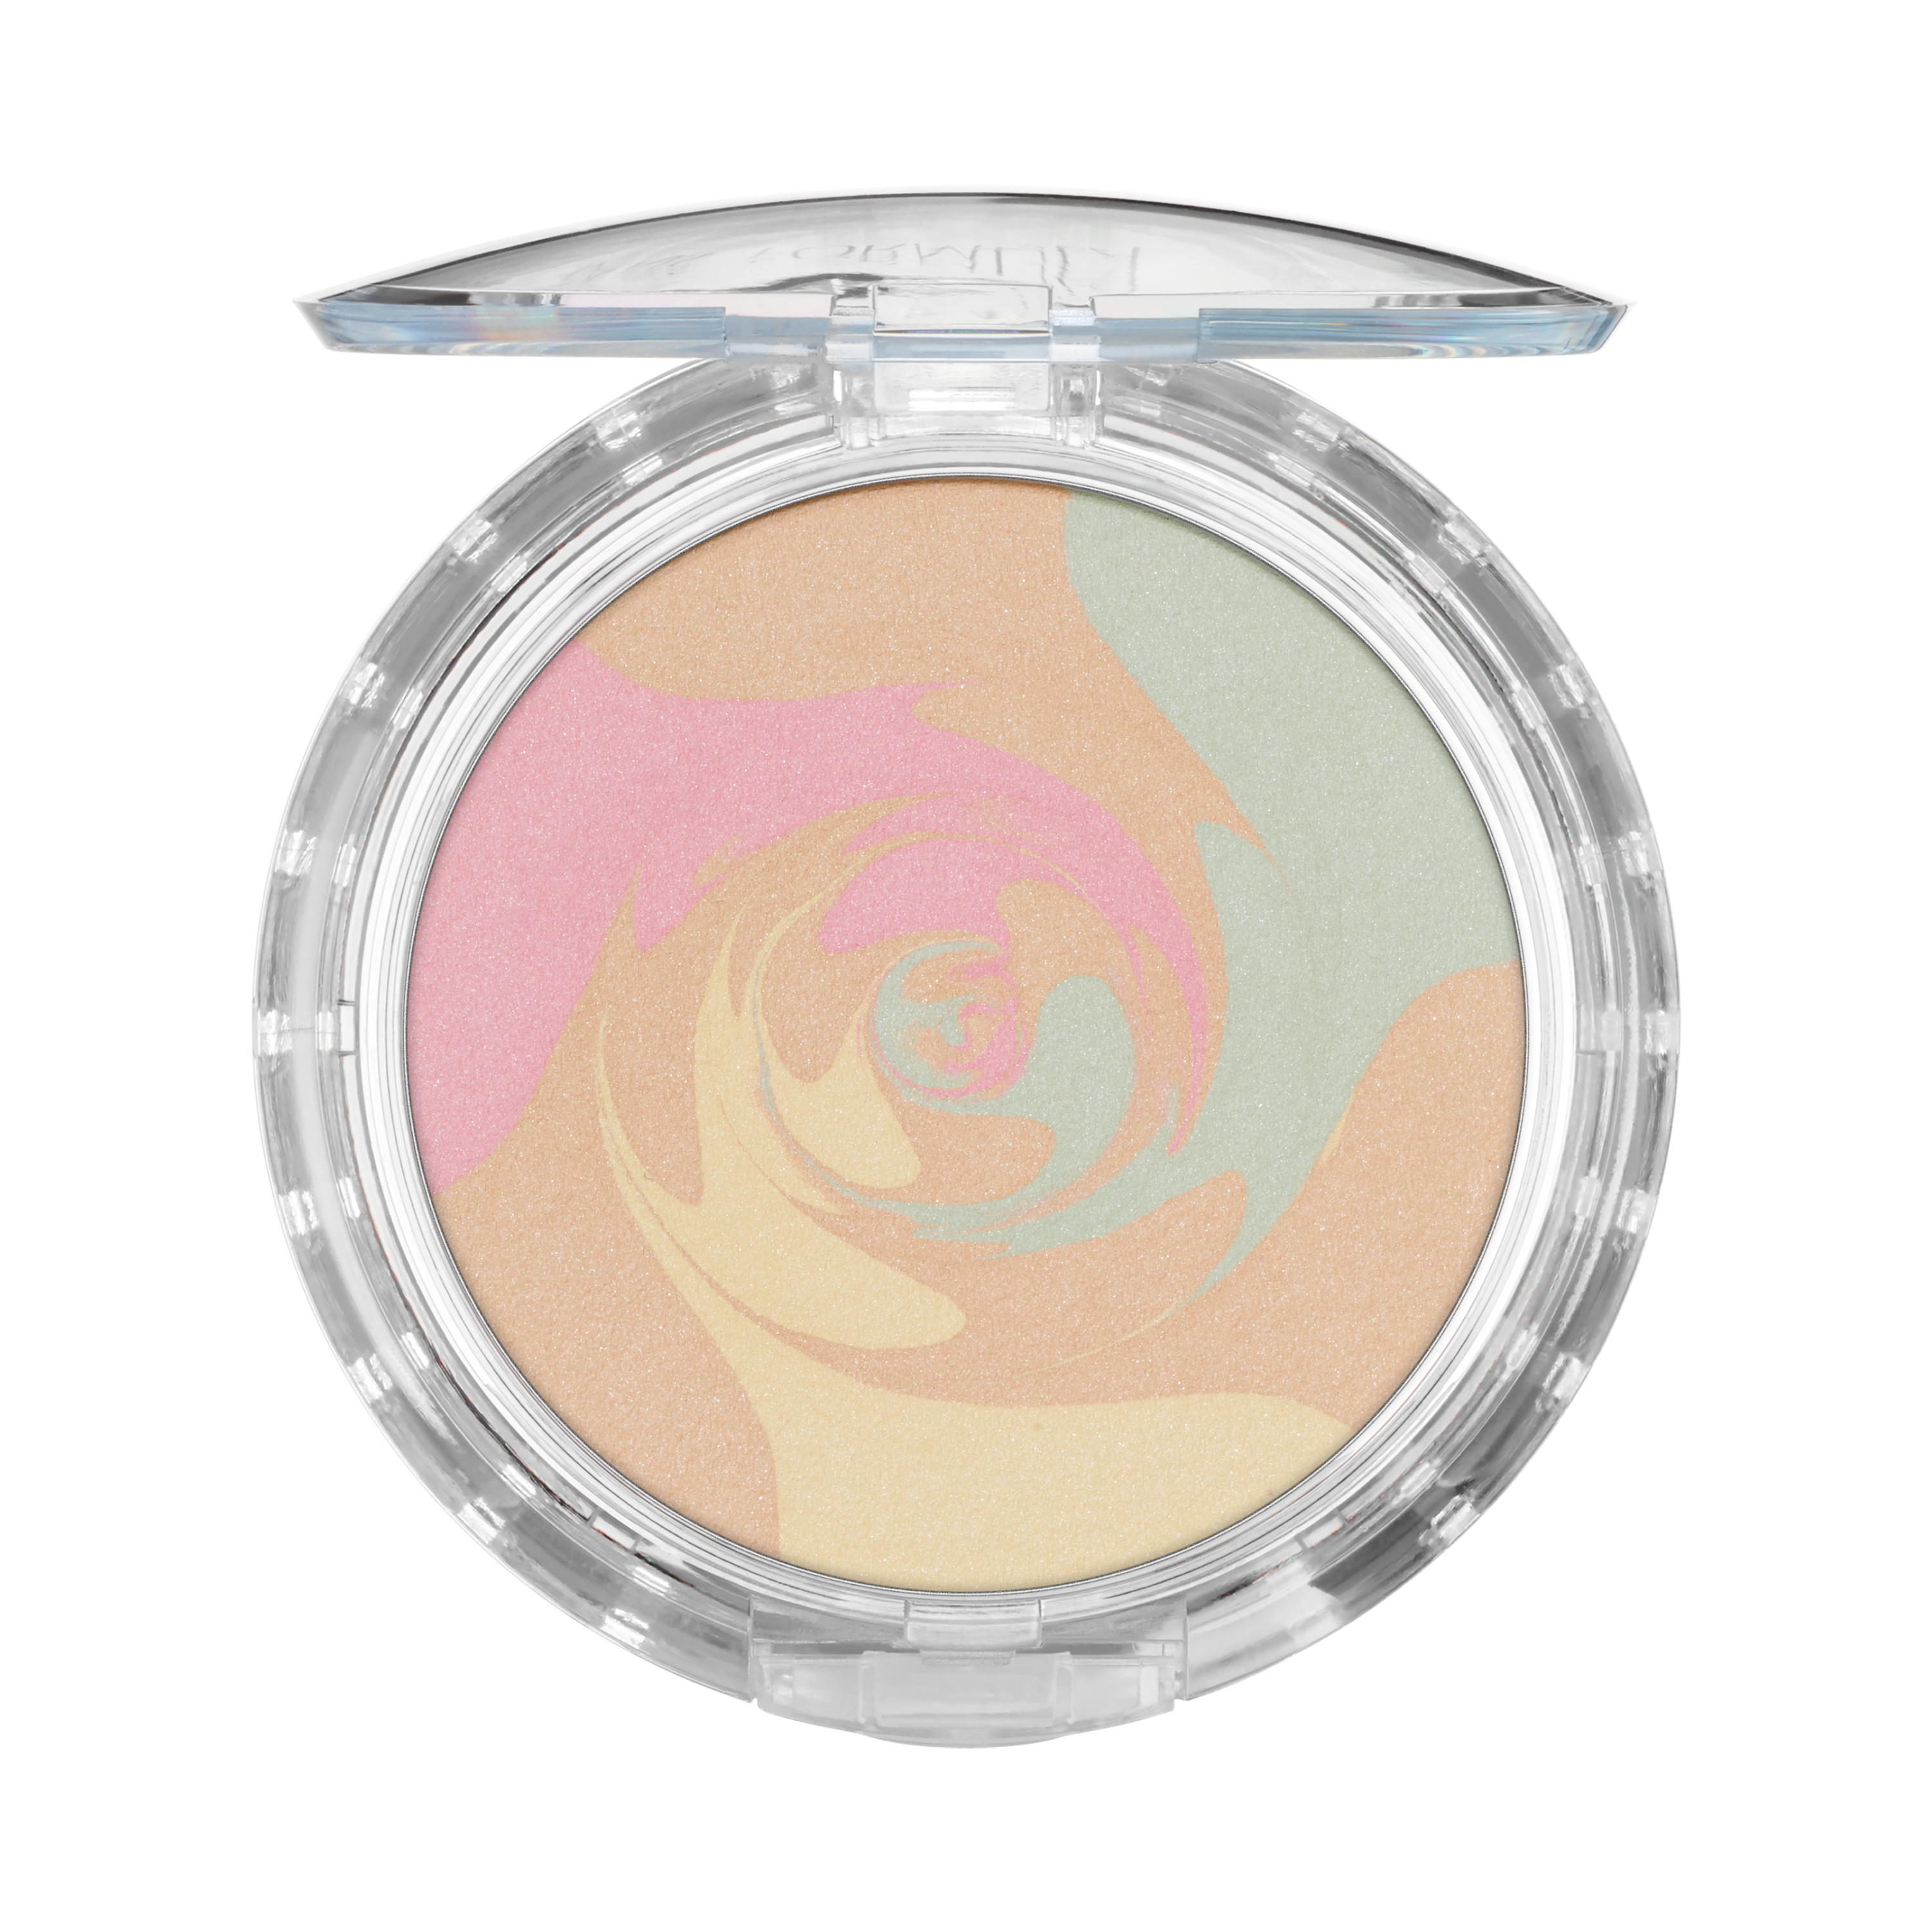 Physicians Formula Mineral Wear® Talc-Free Mineral Correcting Powder, Natural Beige - image 1 of 6